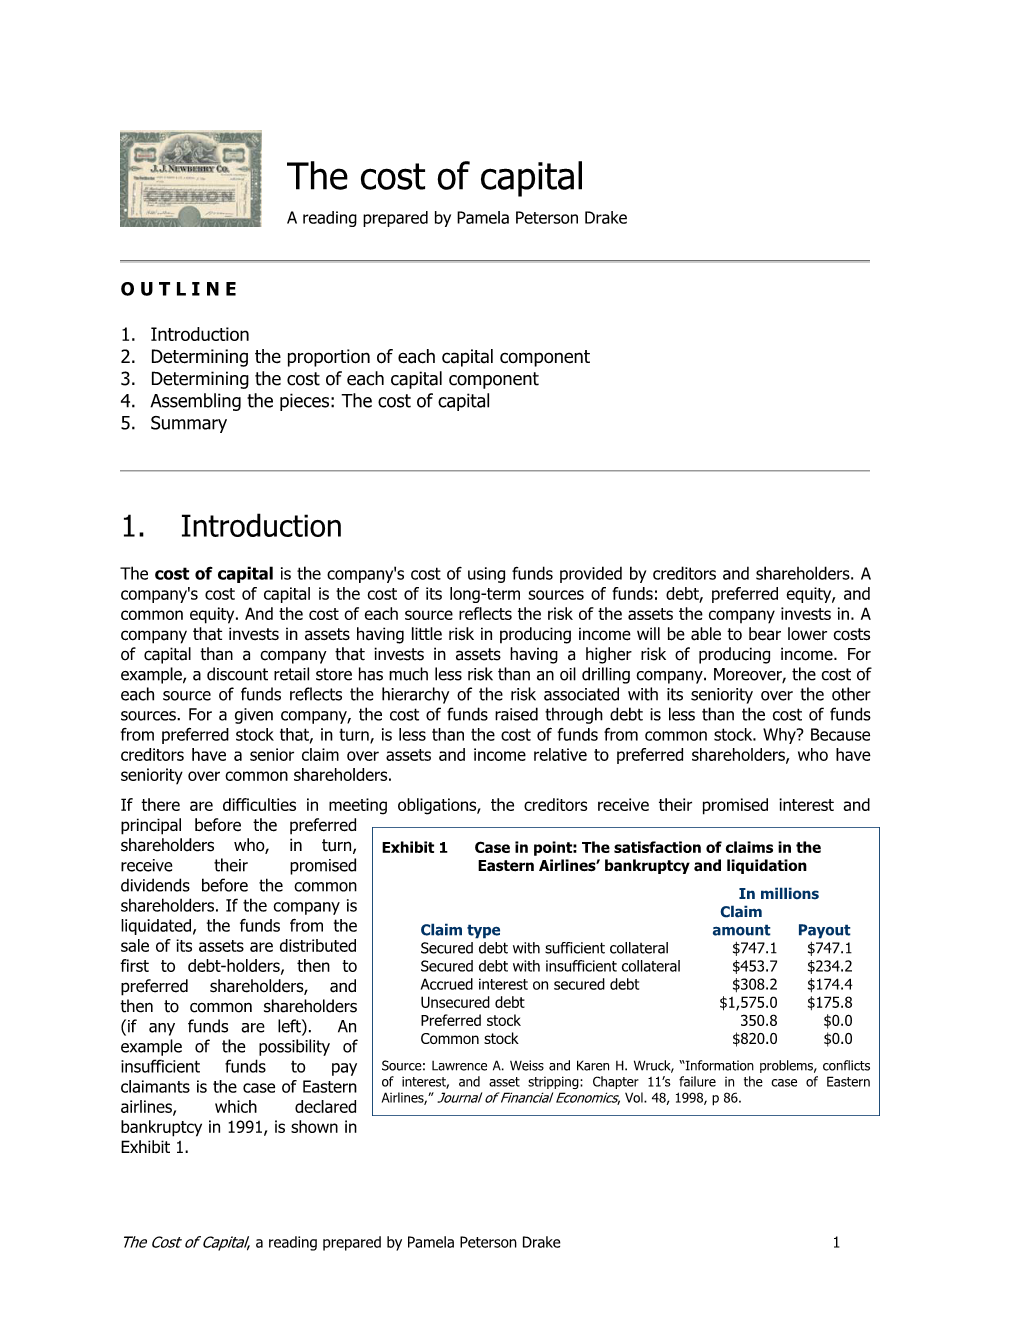 The Cost of Capital